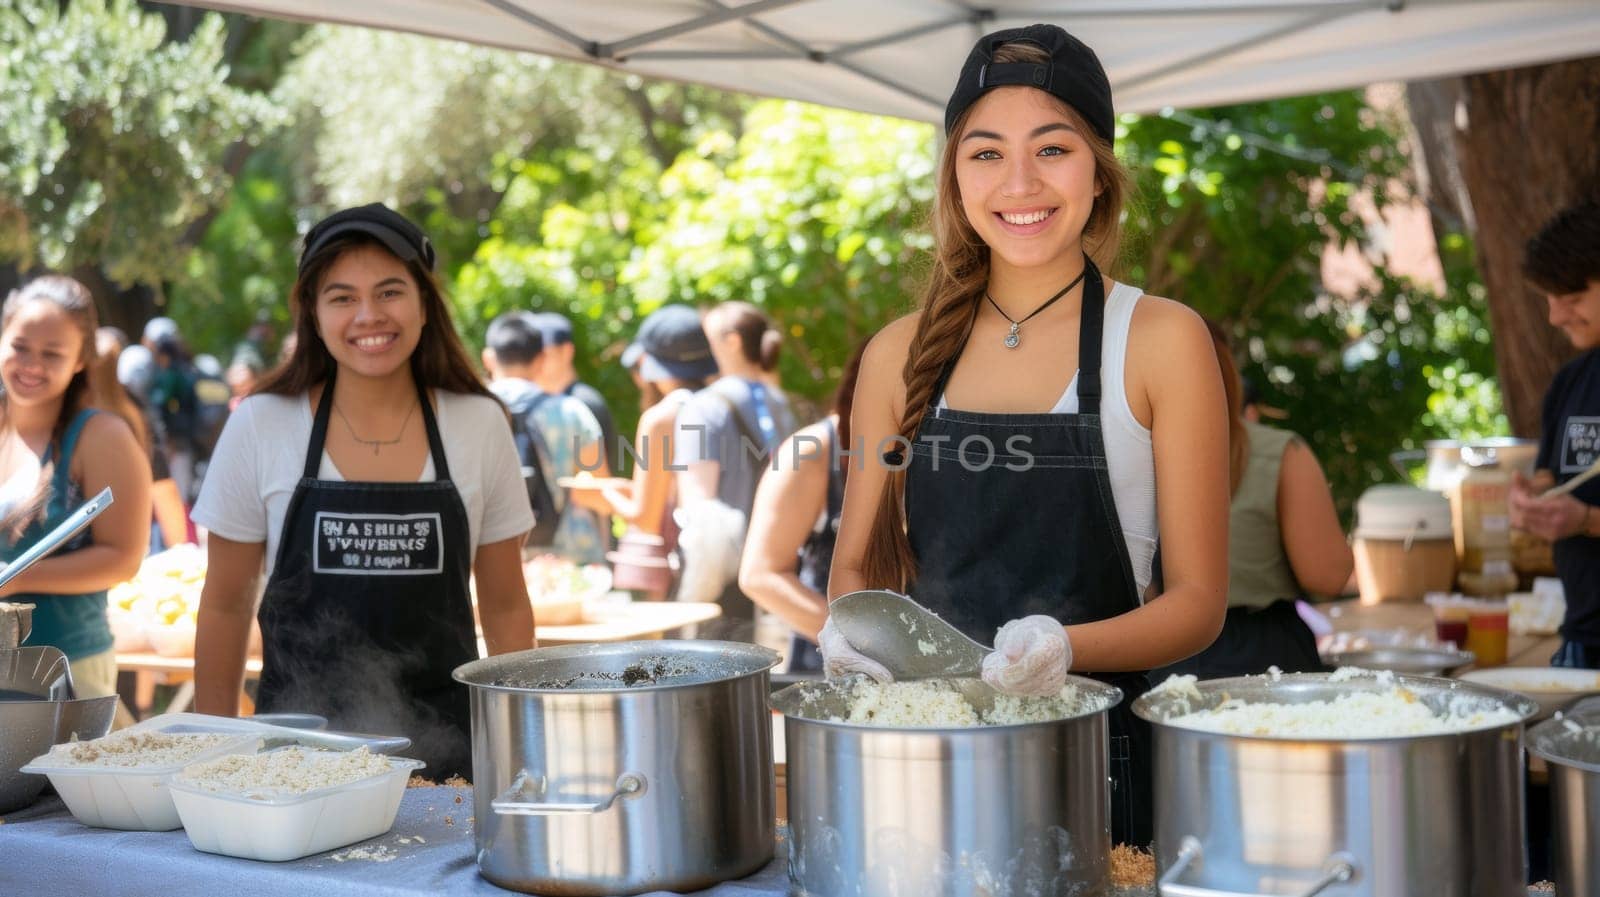 A woman in a black hat and aprons serving food at an outdoor event, AI by starush